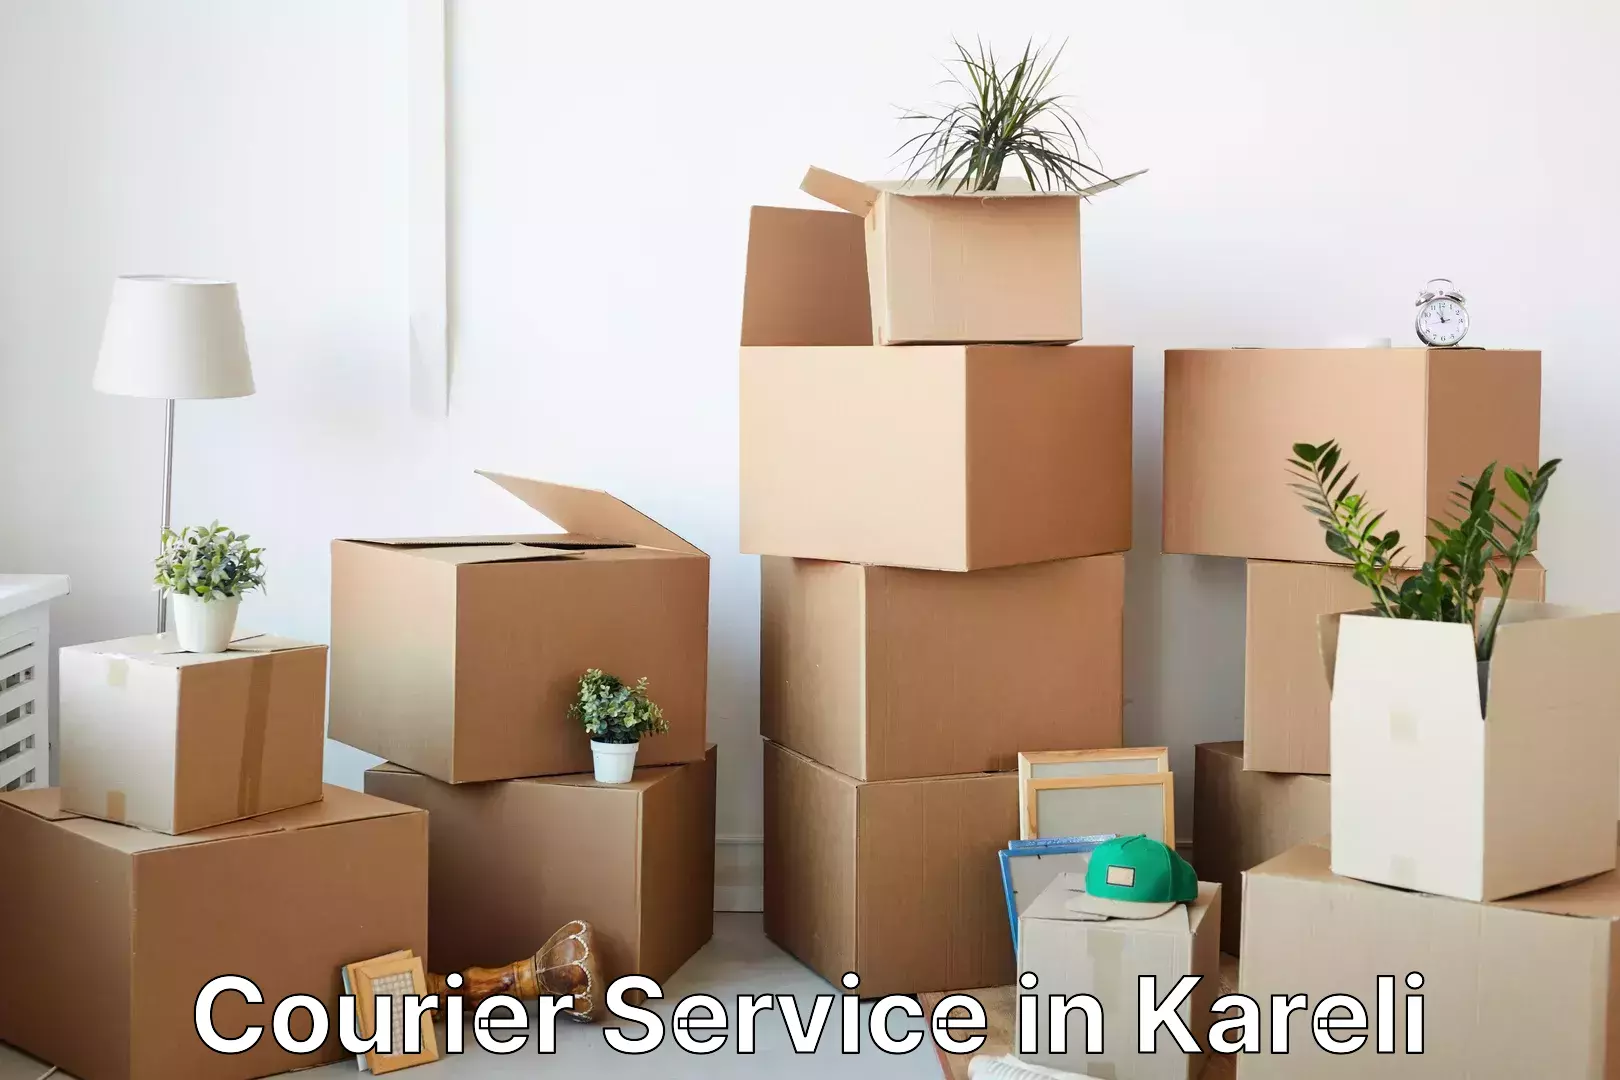 Express package services in Kareli